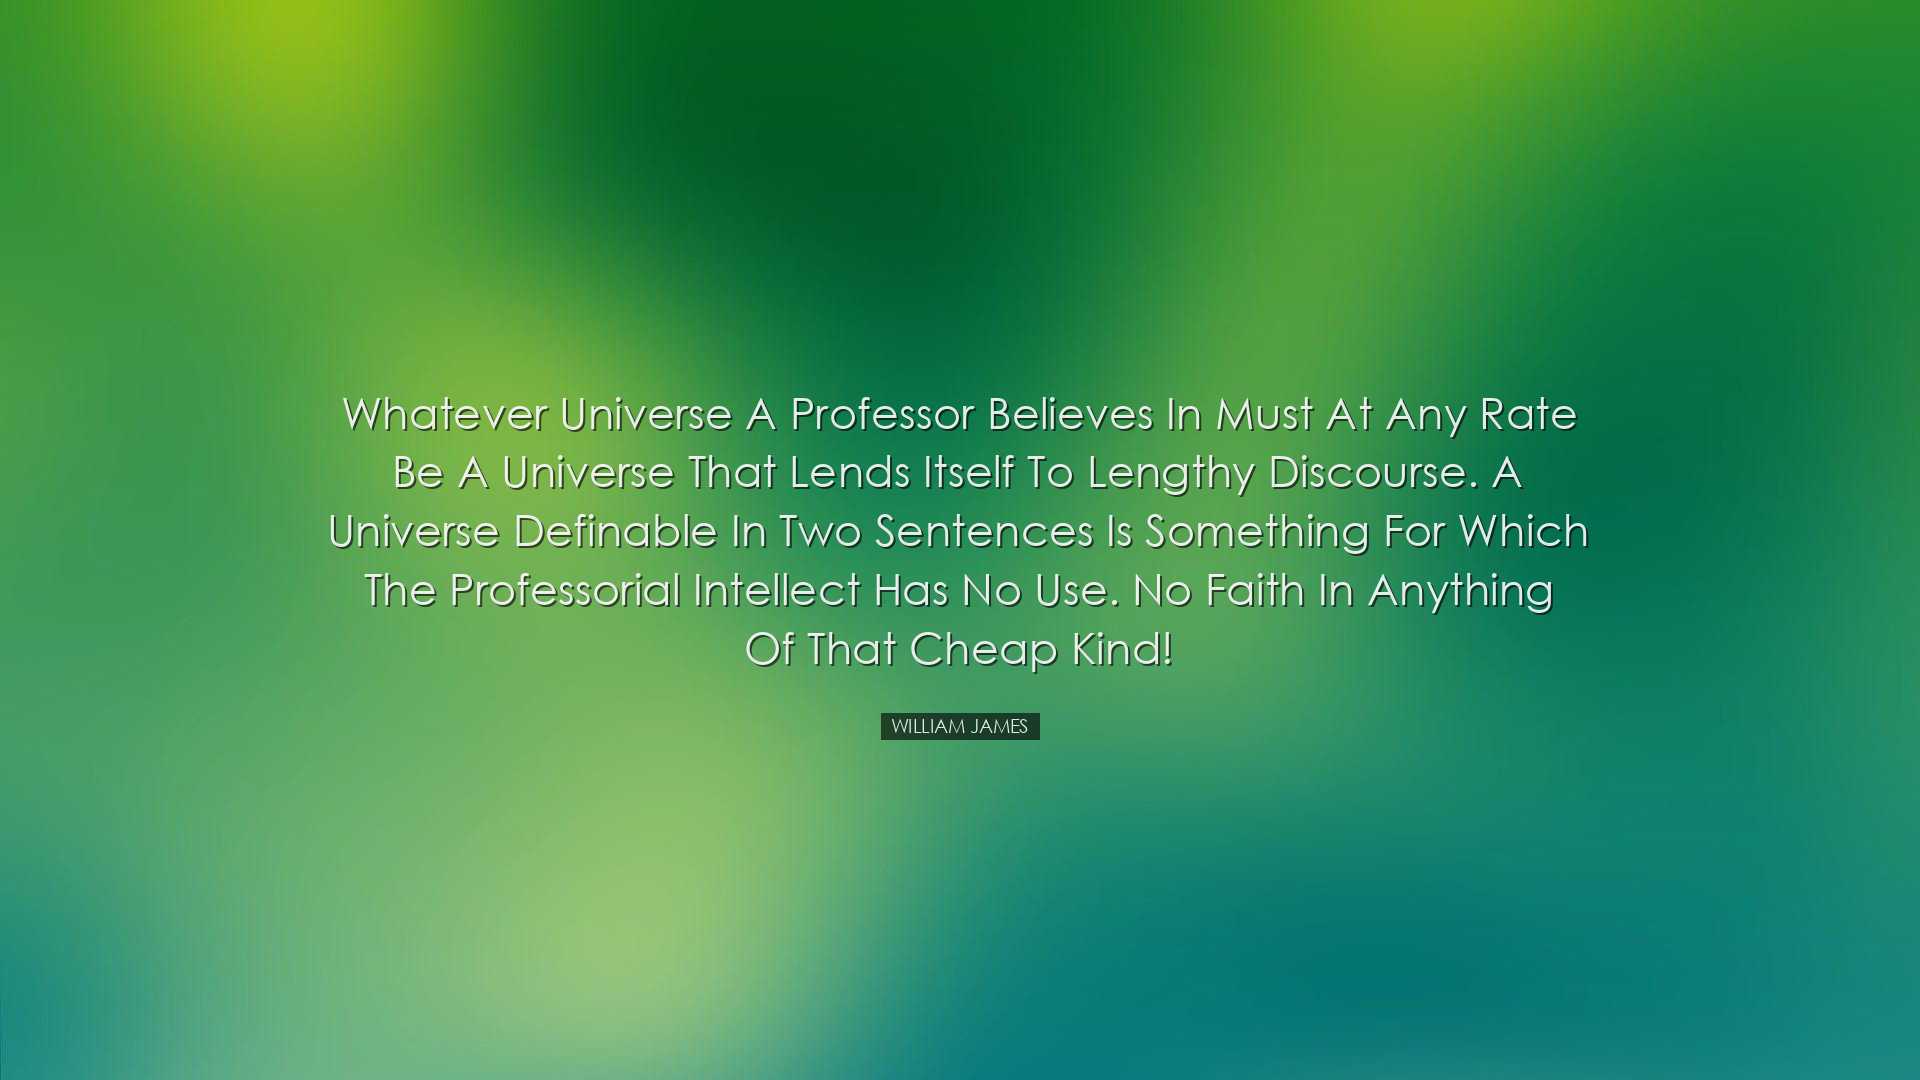 Whatever universe a professor believes in must at any rate be a un